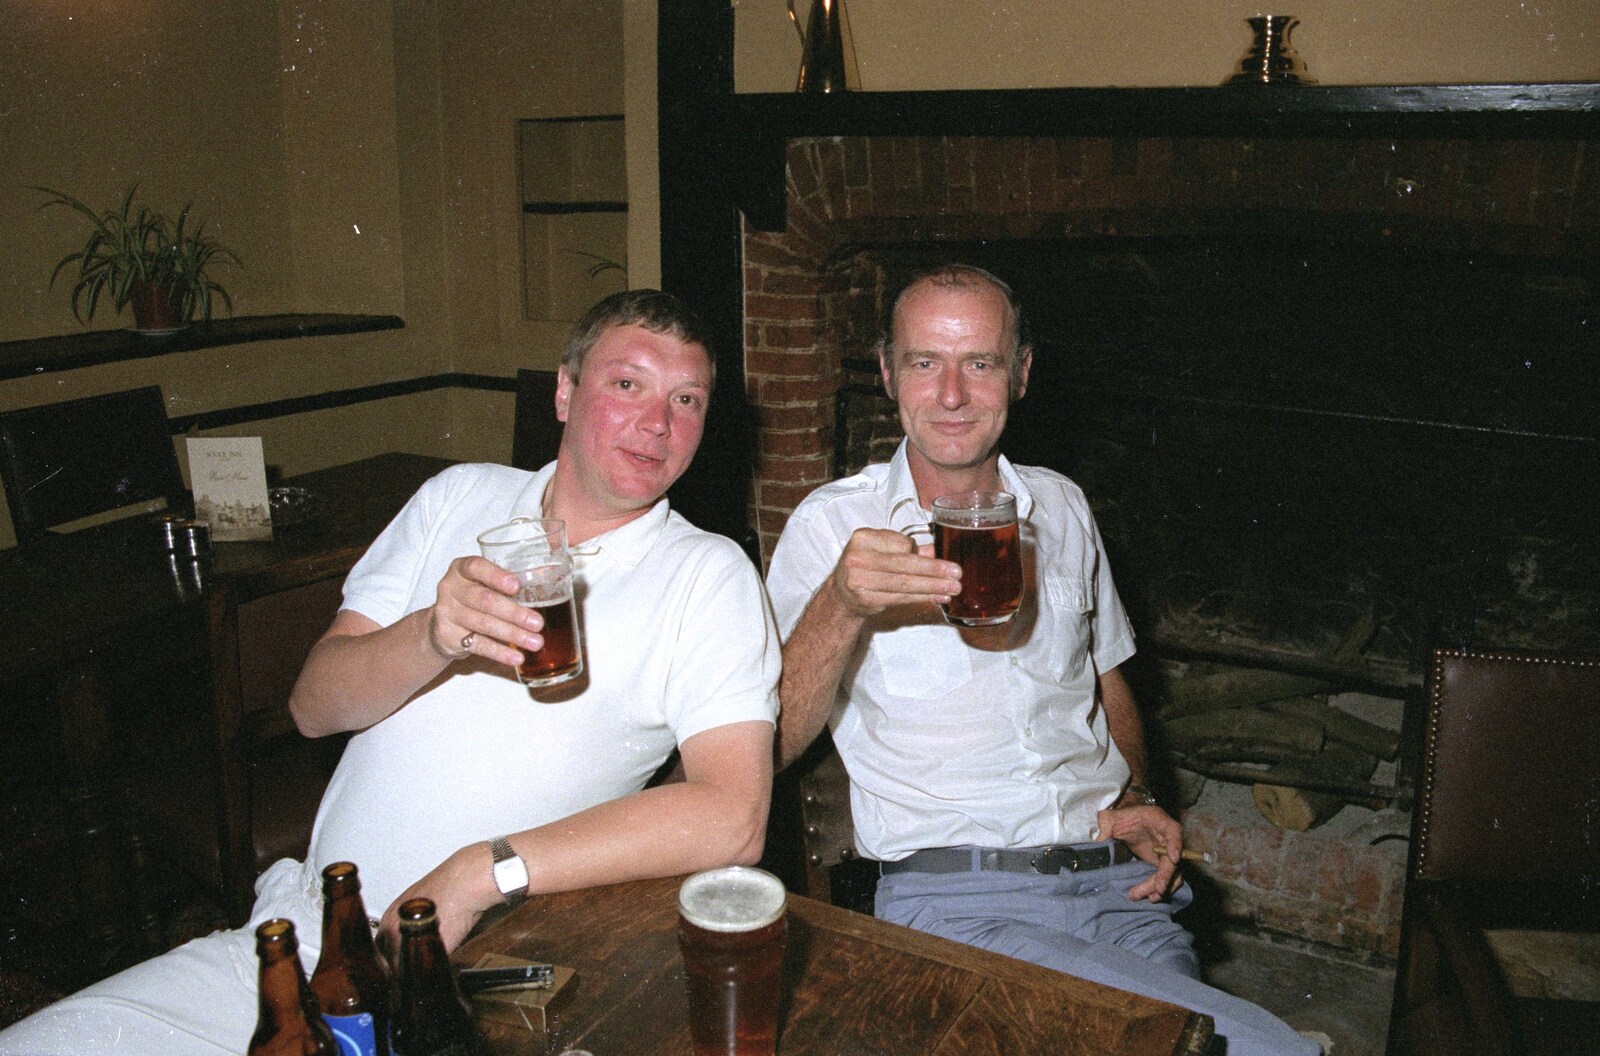 Stuston Sewerage and Kate's Printec Birthday, Scole Inn, Norfolk and Suffolk - 2nd August 1990: Bill Hartley and Kiwi raise a glass